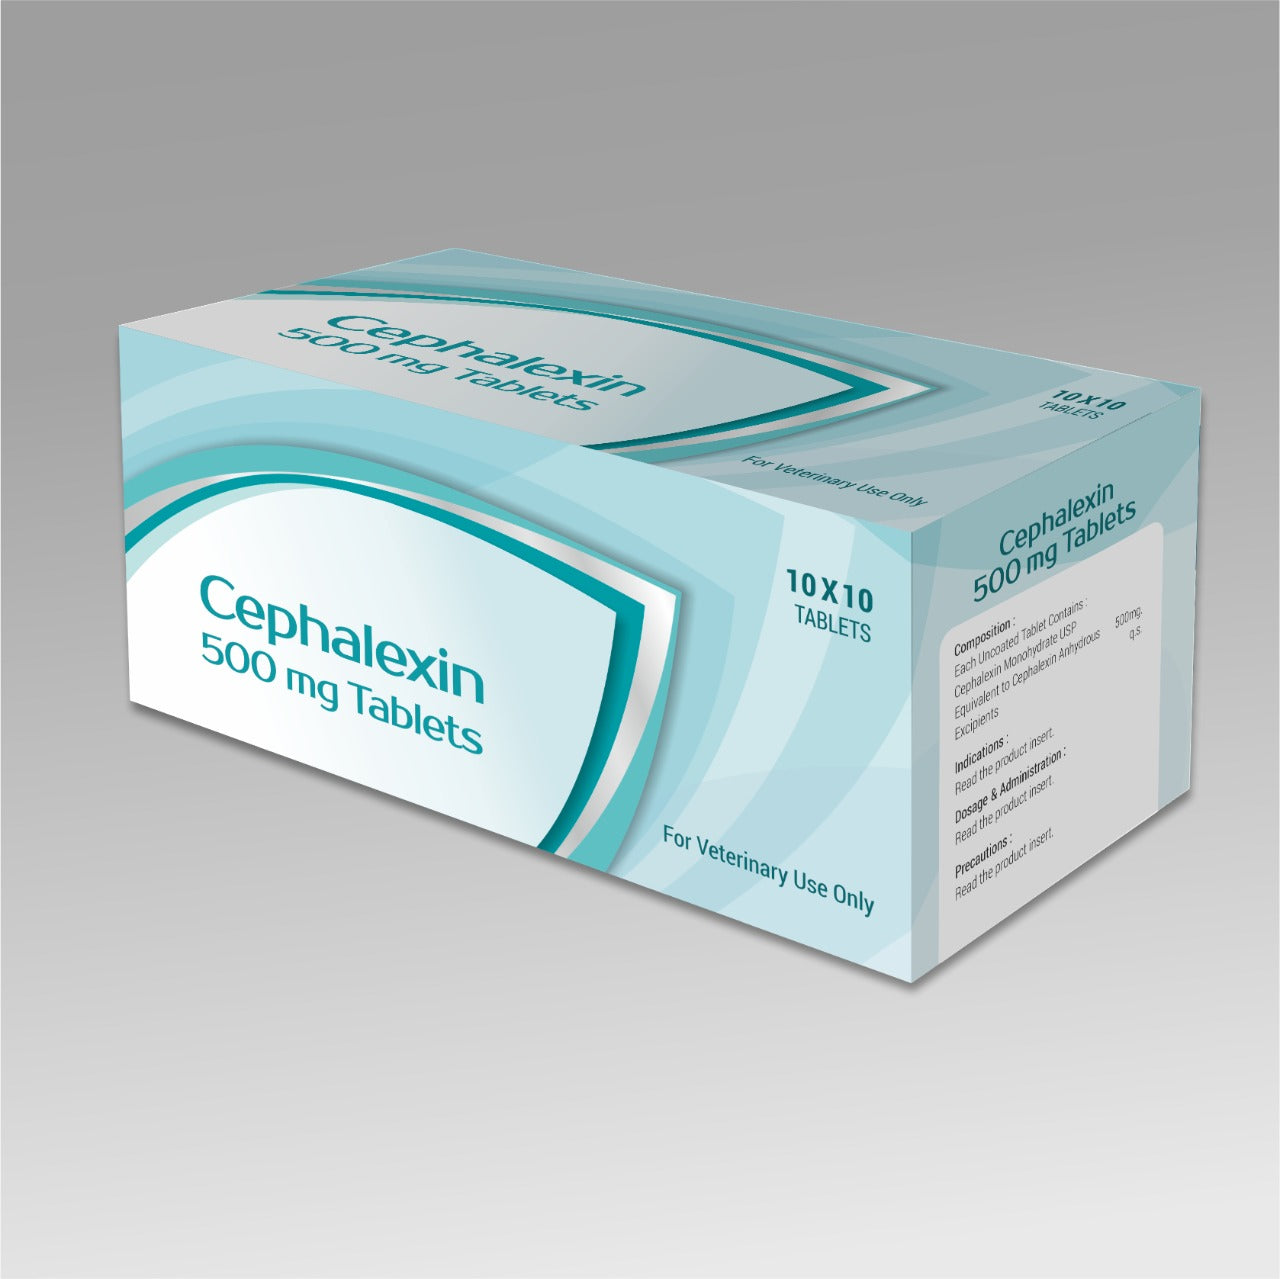 Cefalexin Monohydrate 500mg Tablet